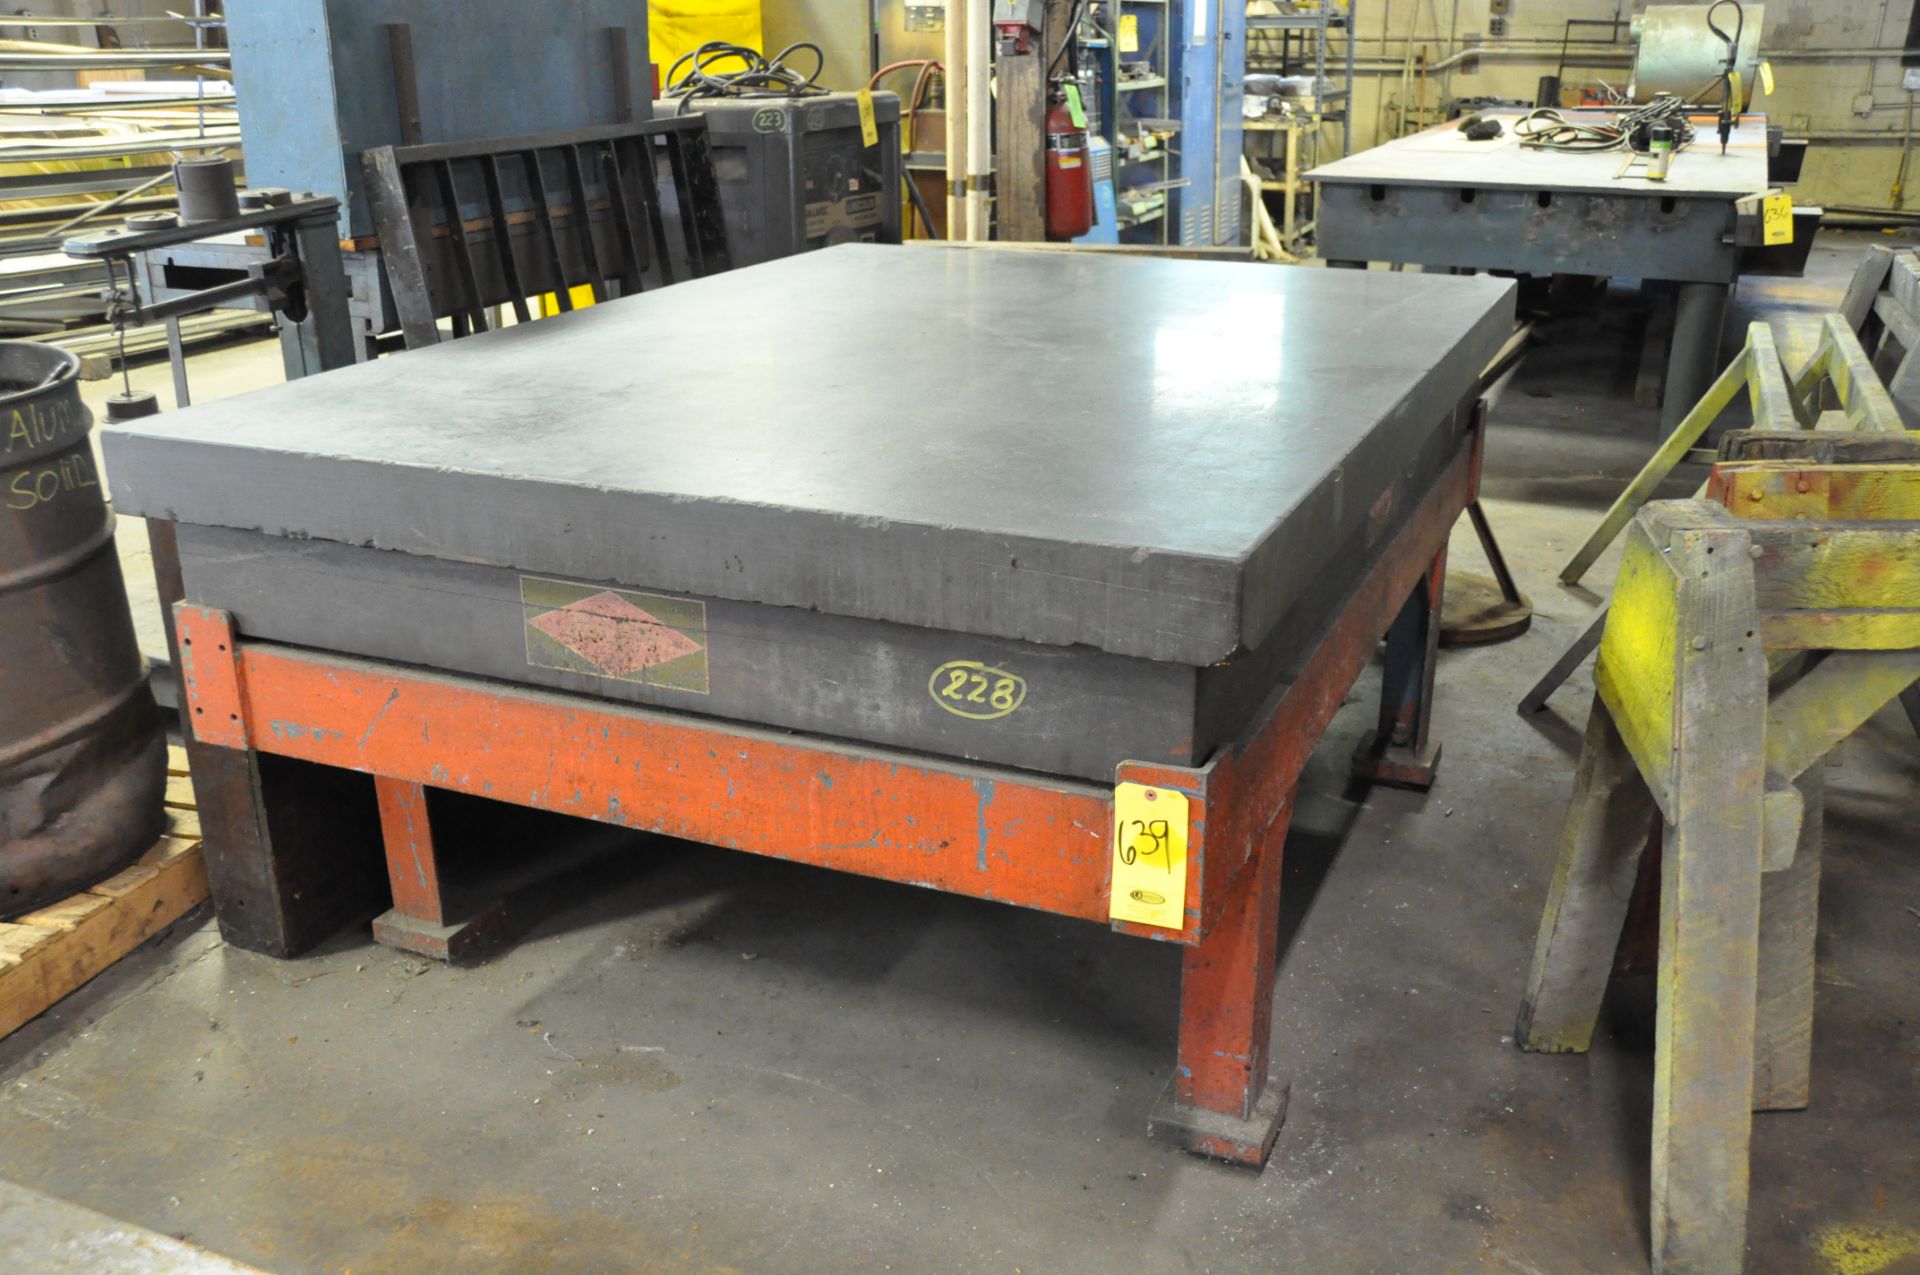 RAHN BLACK GRANITE SURFACE PLATE WITH METAL STAND, 60" X 74" X 12" THICK, 4 LEDGE.